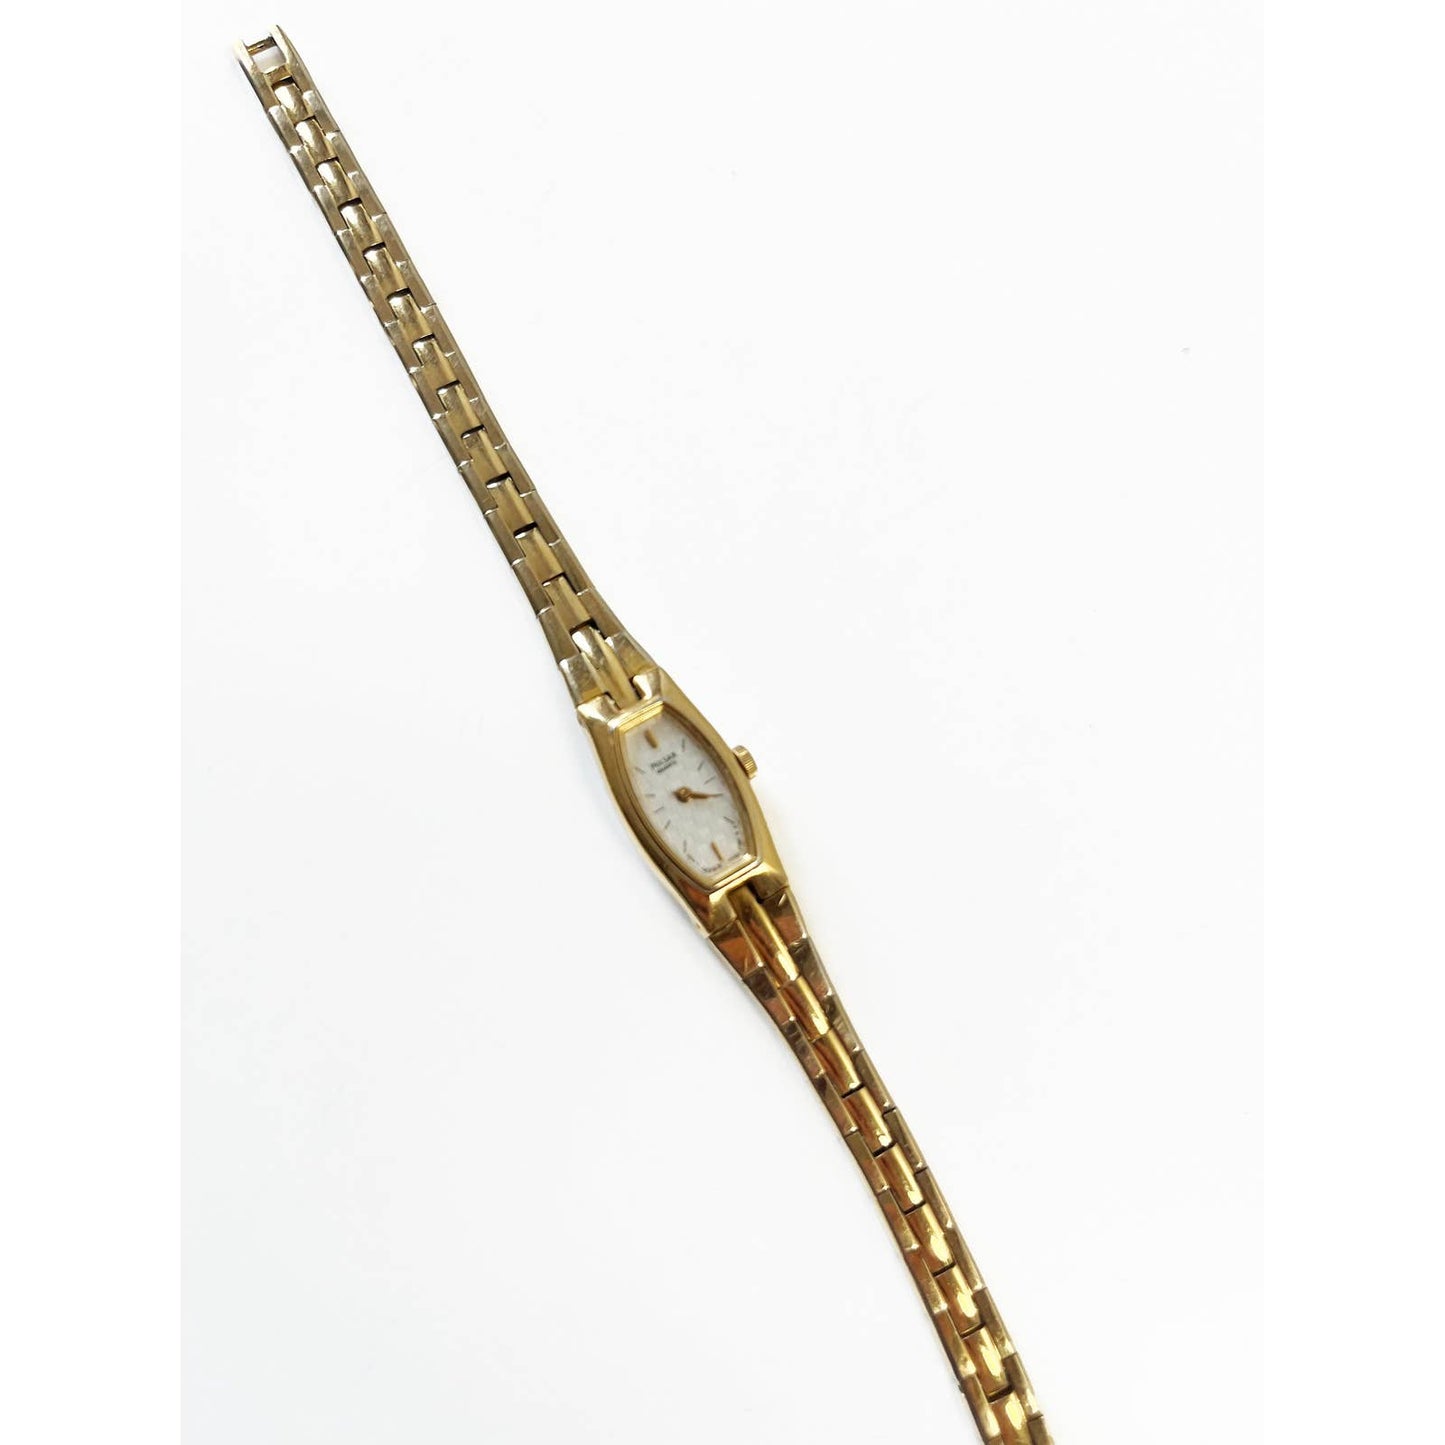 Vintage 90s Small Gold Watch with Skinny Face | Pulsar